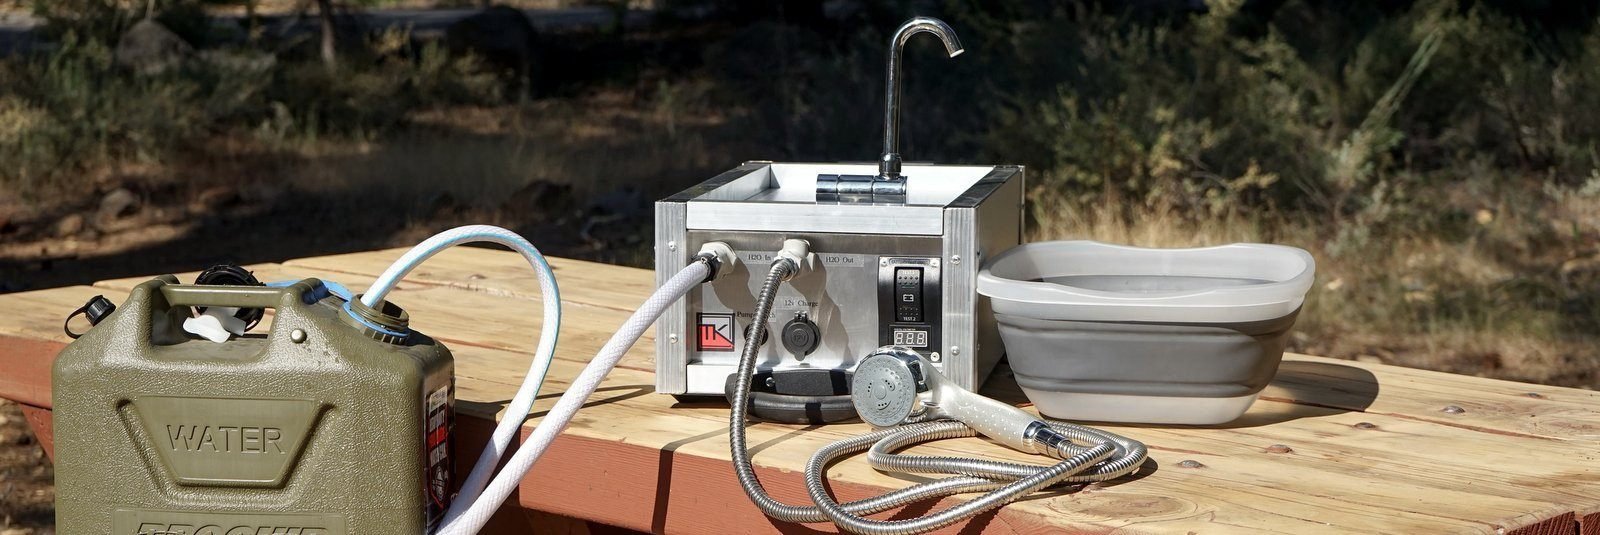 Camping Hot Water Portable Showers Sinks Trail Kitchens